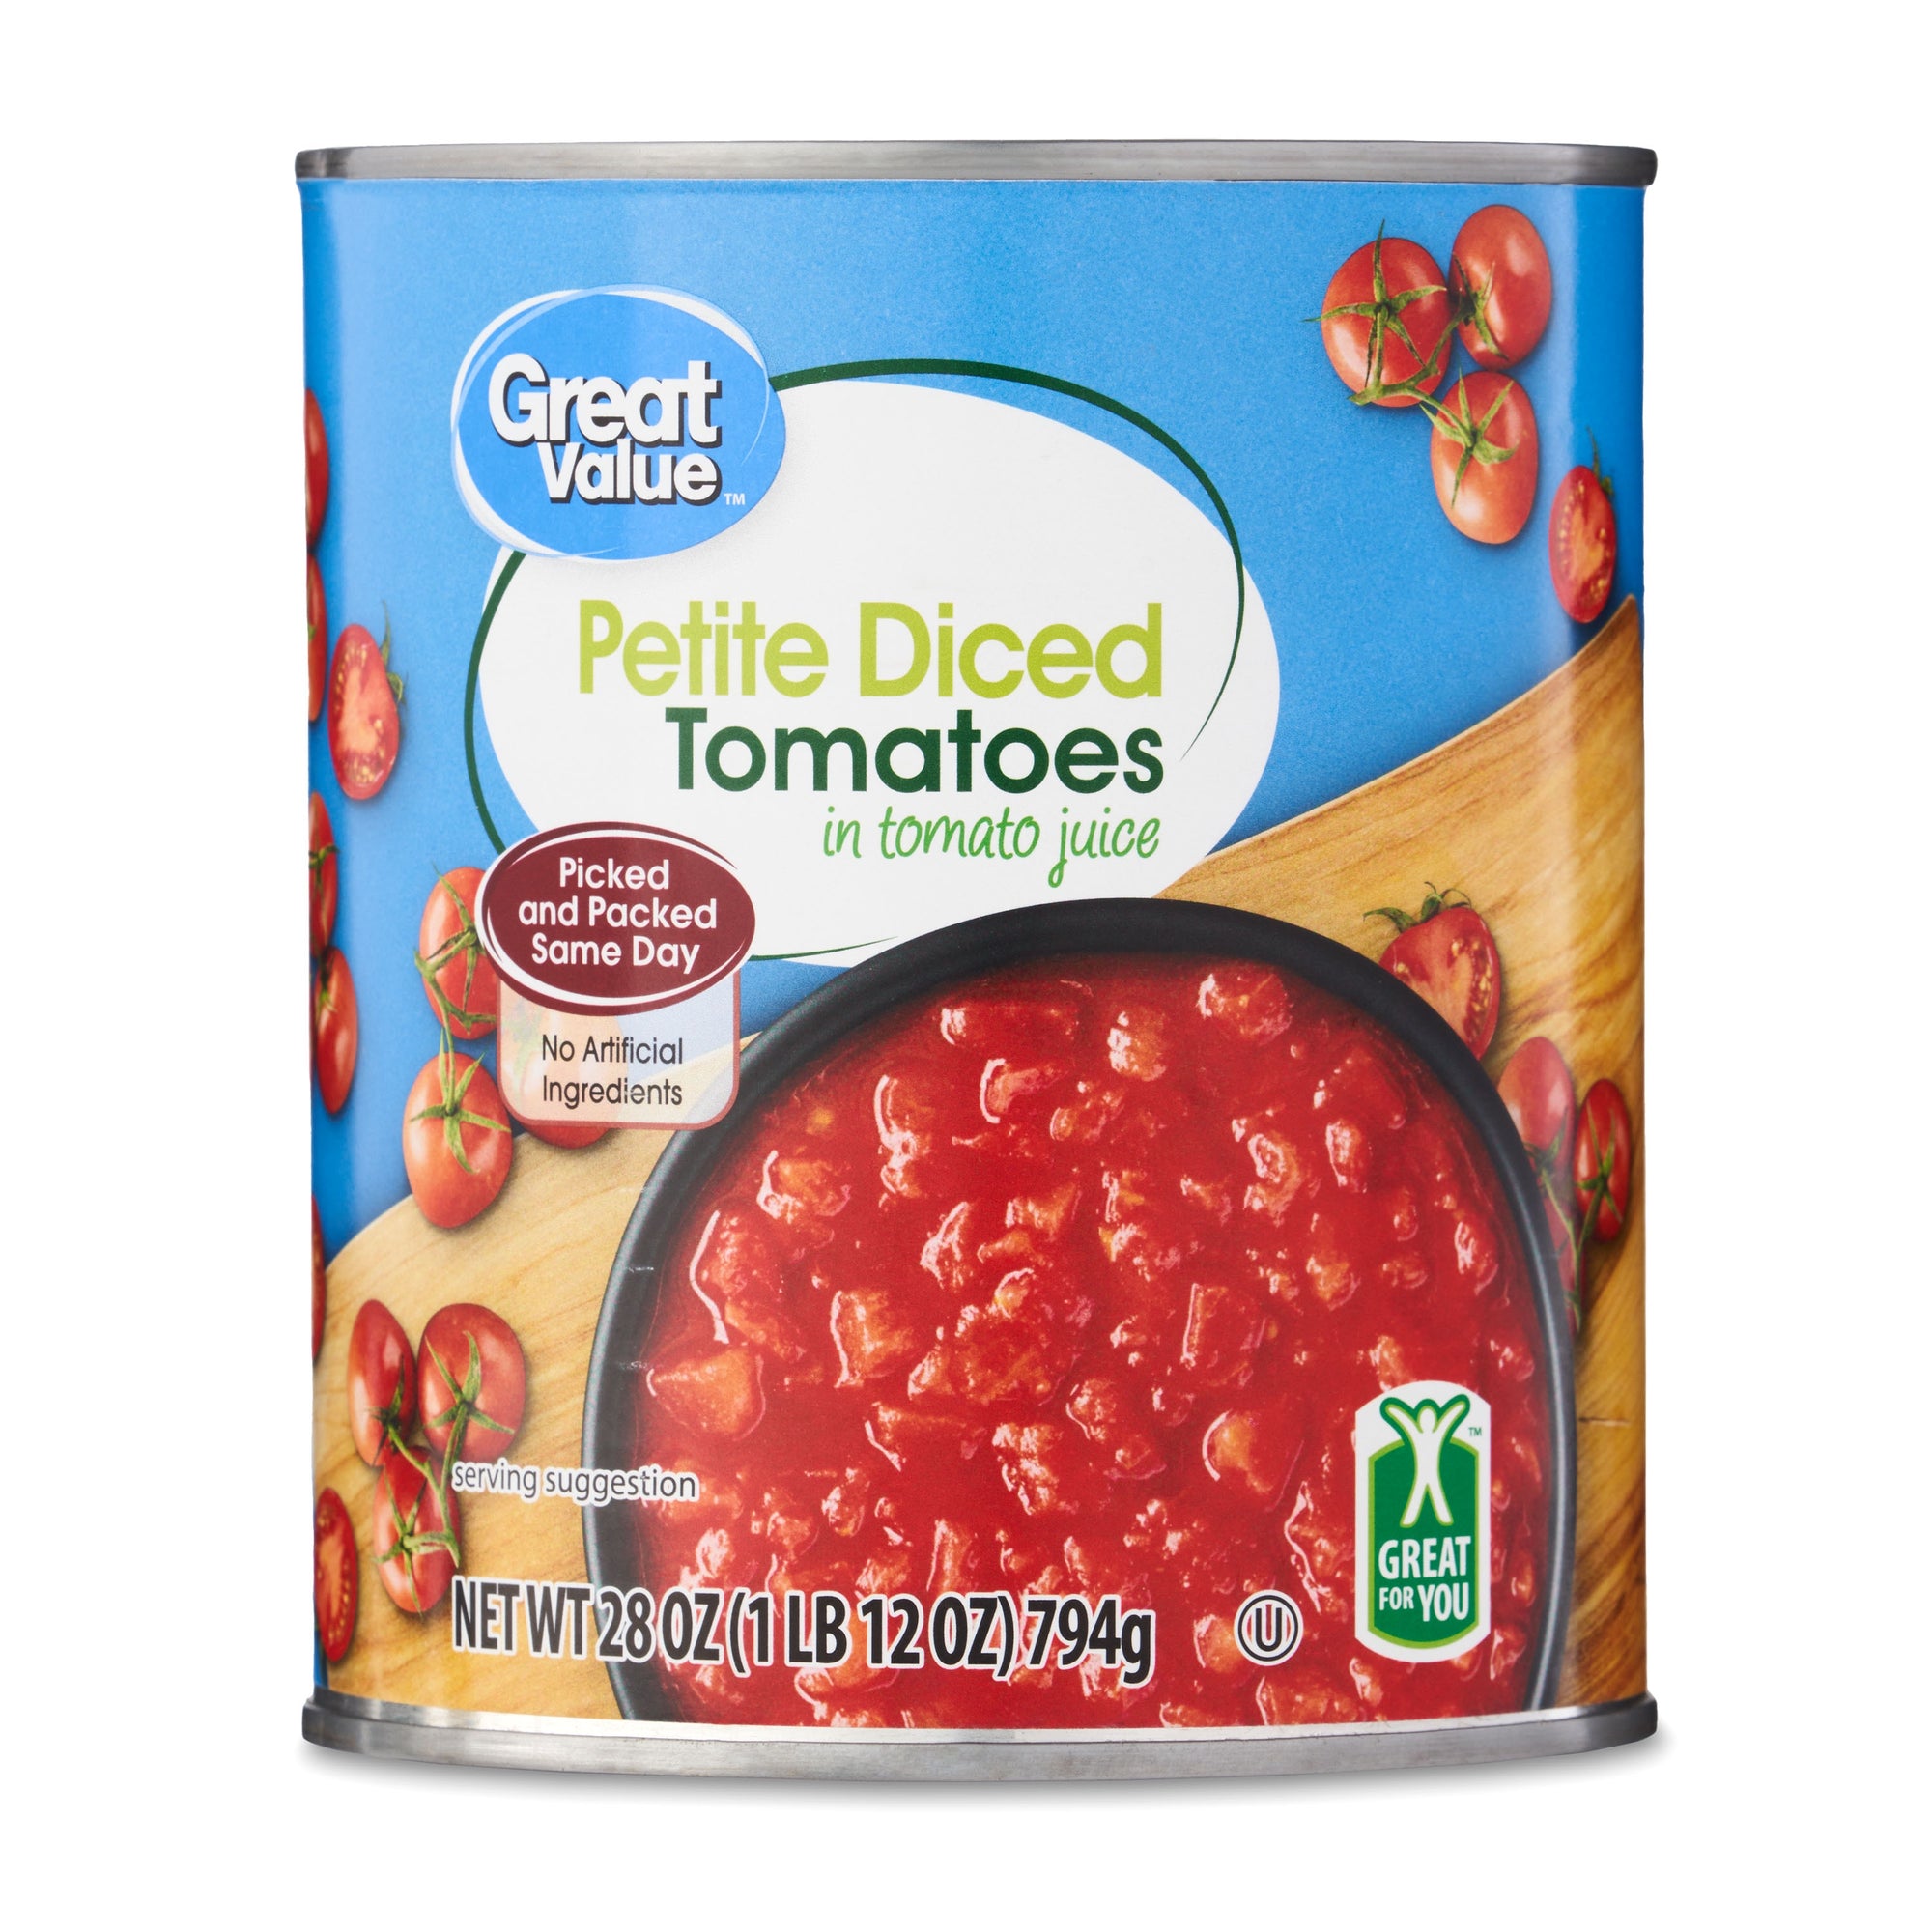 Great Value Petite Diced Tomatoes in Tomato Juice/28 oz